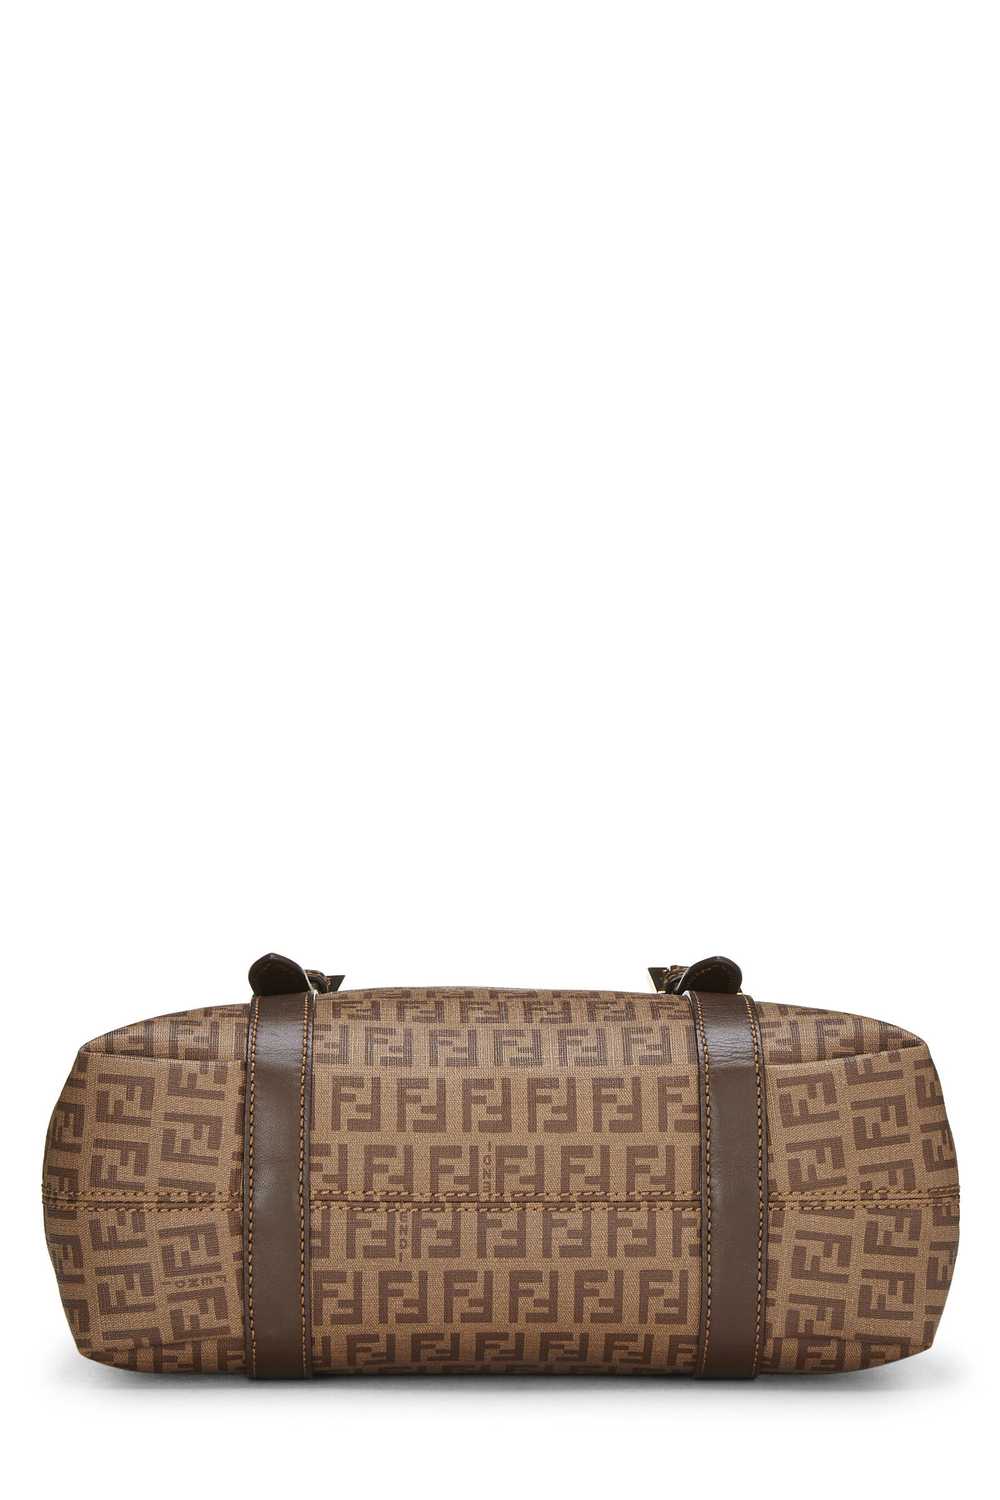 Brown Zucca Coated Canvas Handbag Small - image 5